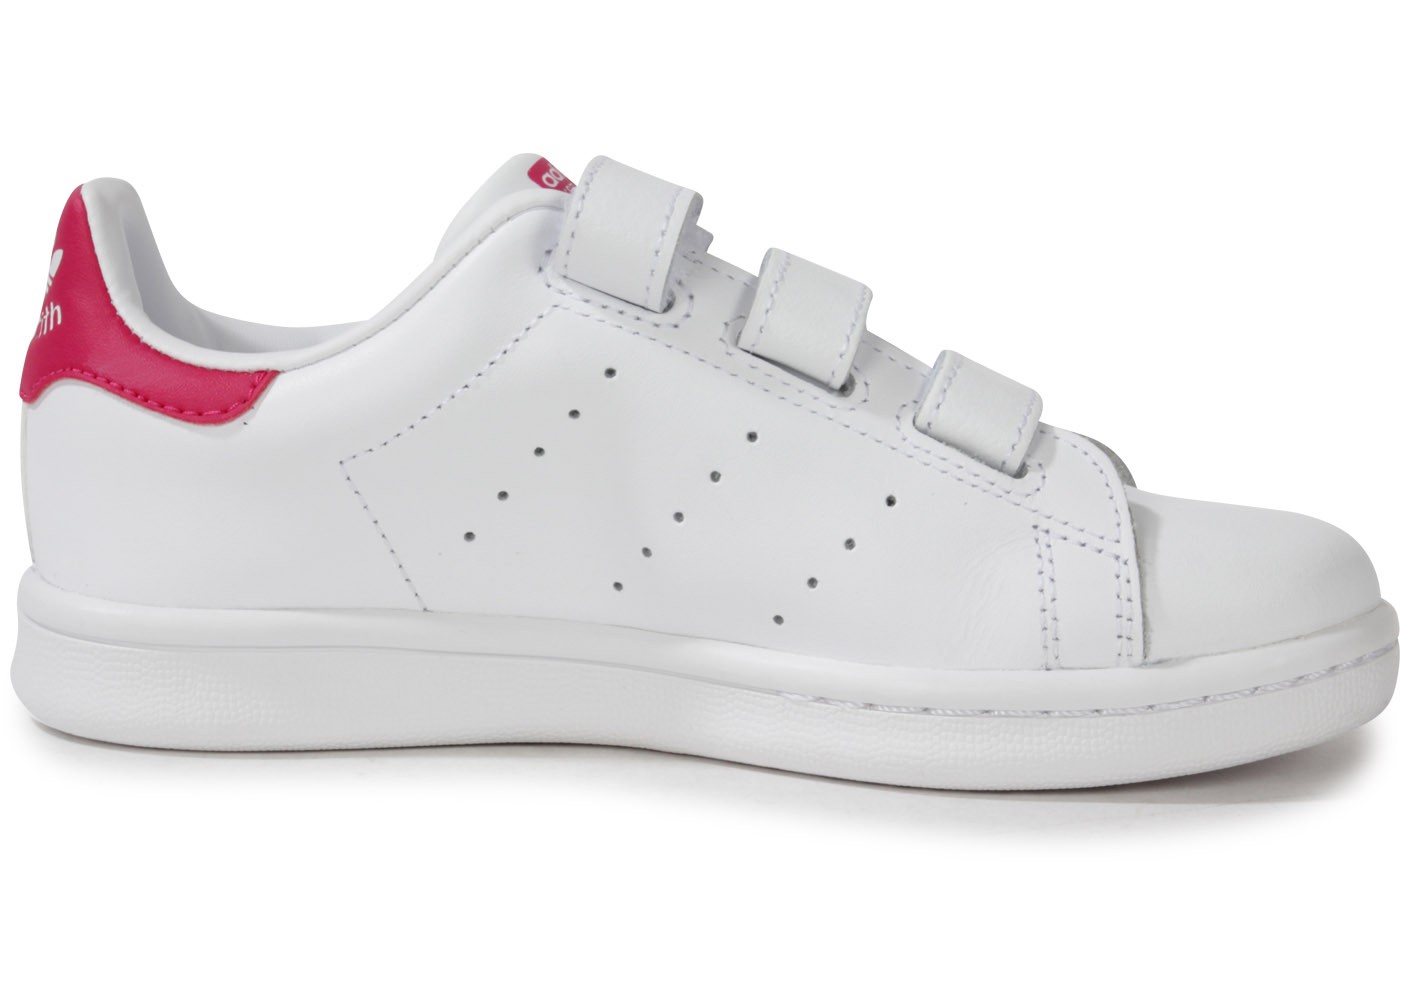 stan smith fille rose